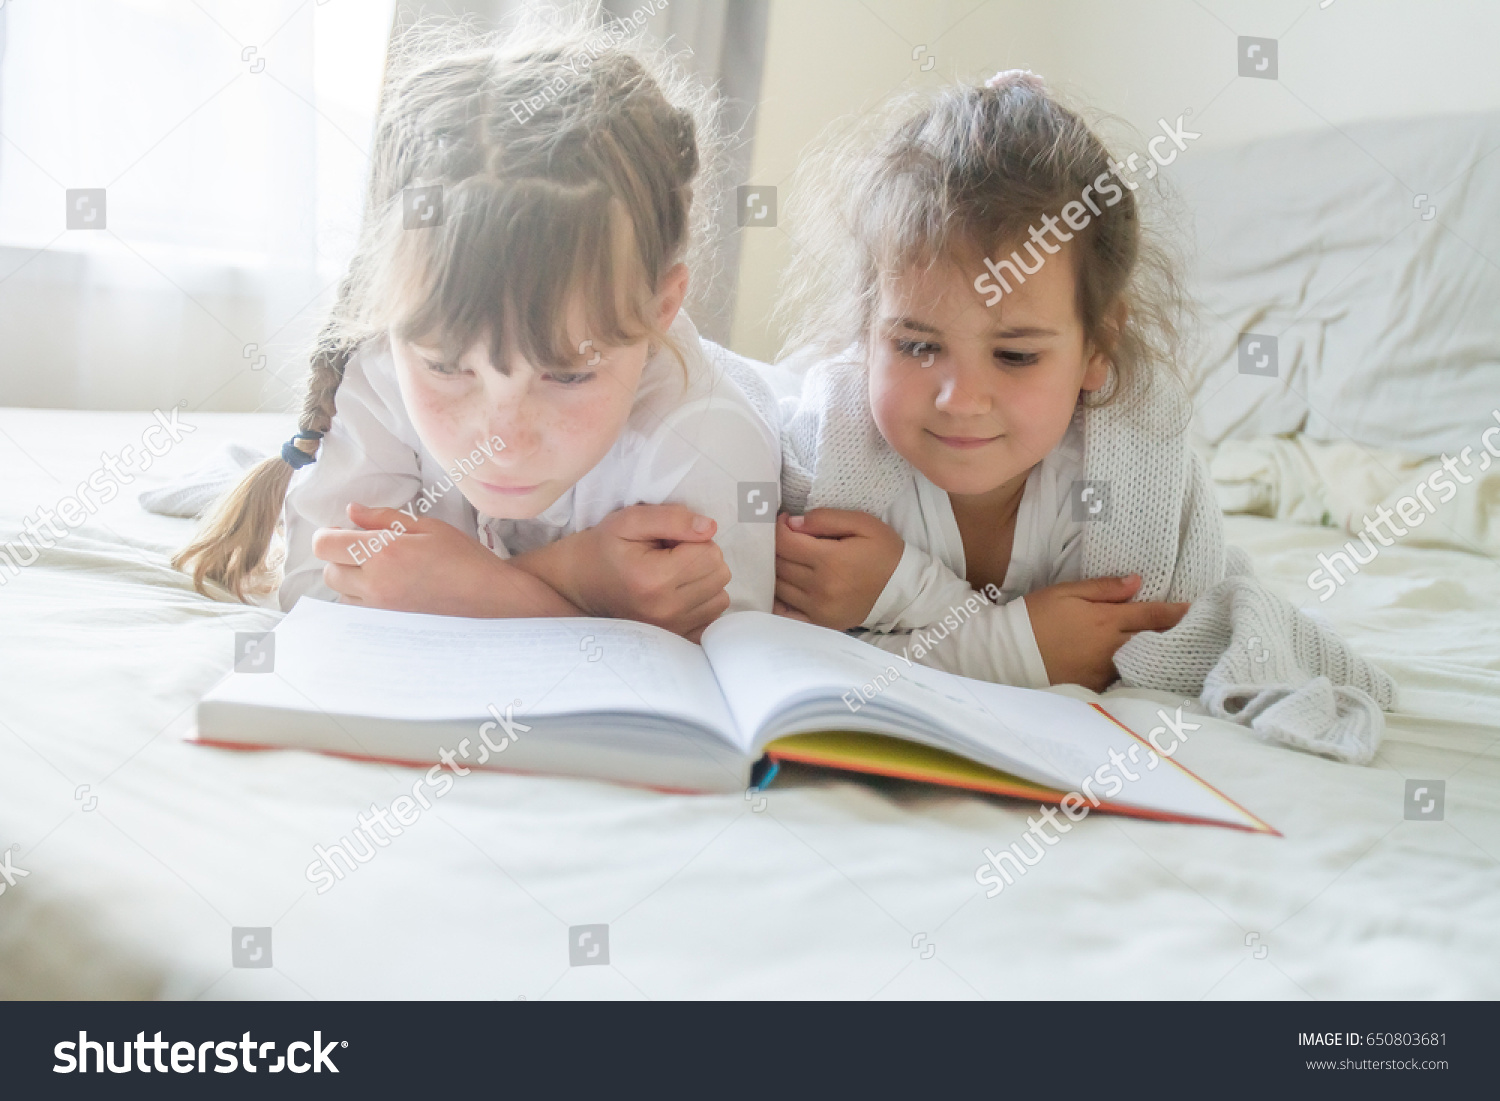 indoor portrait of young european girls - two sisters - lying in bed and reading a book #650803681